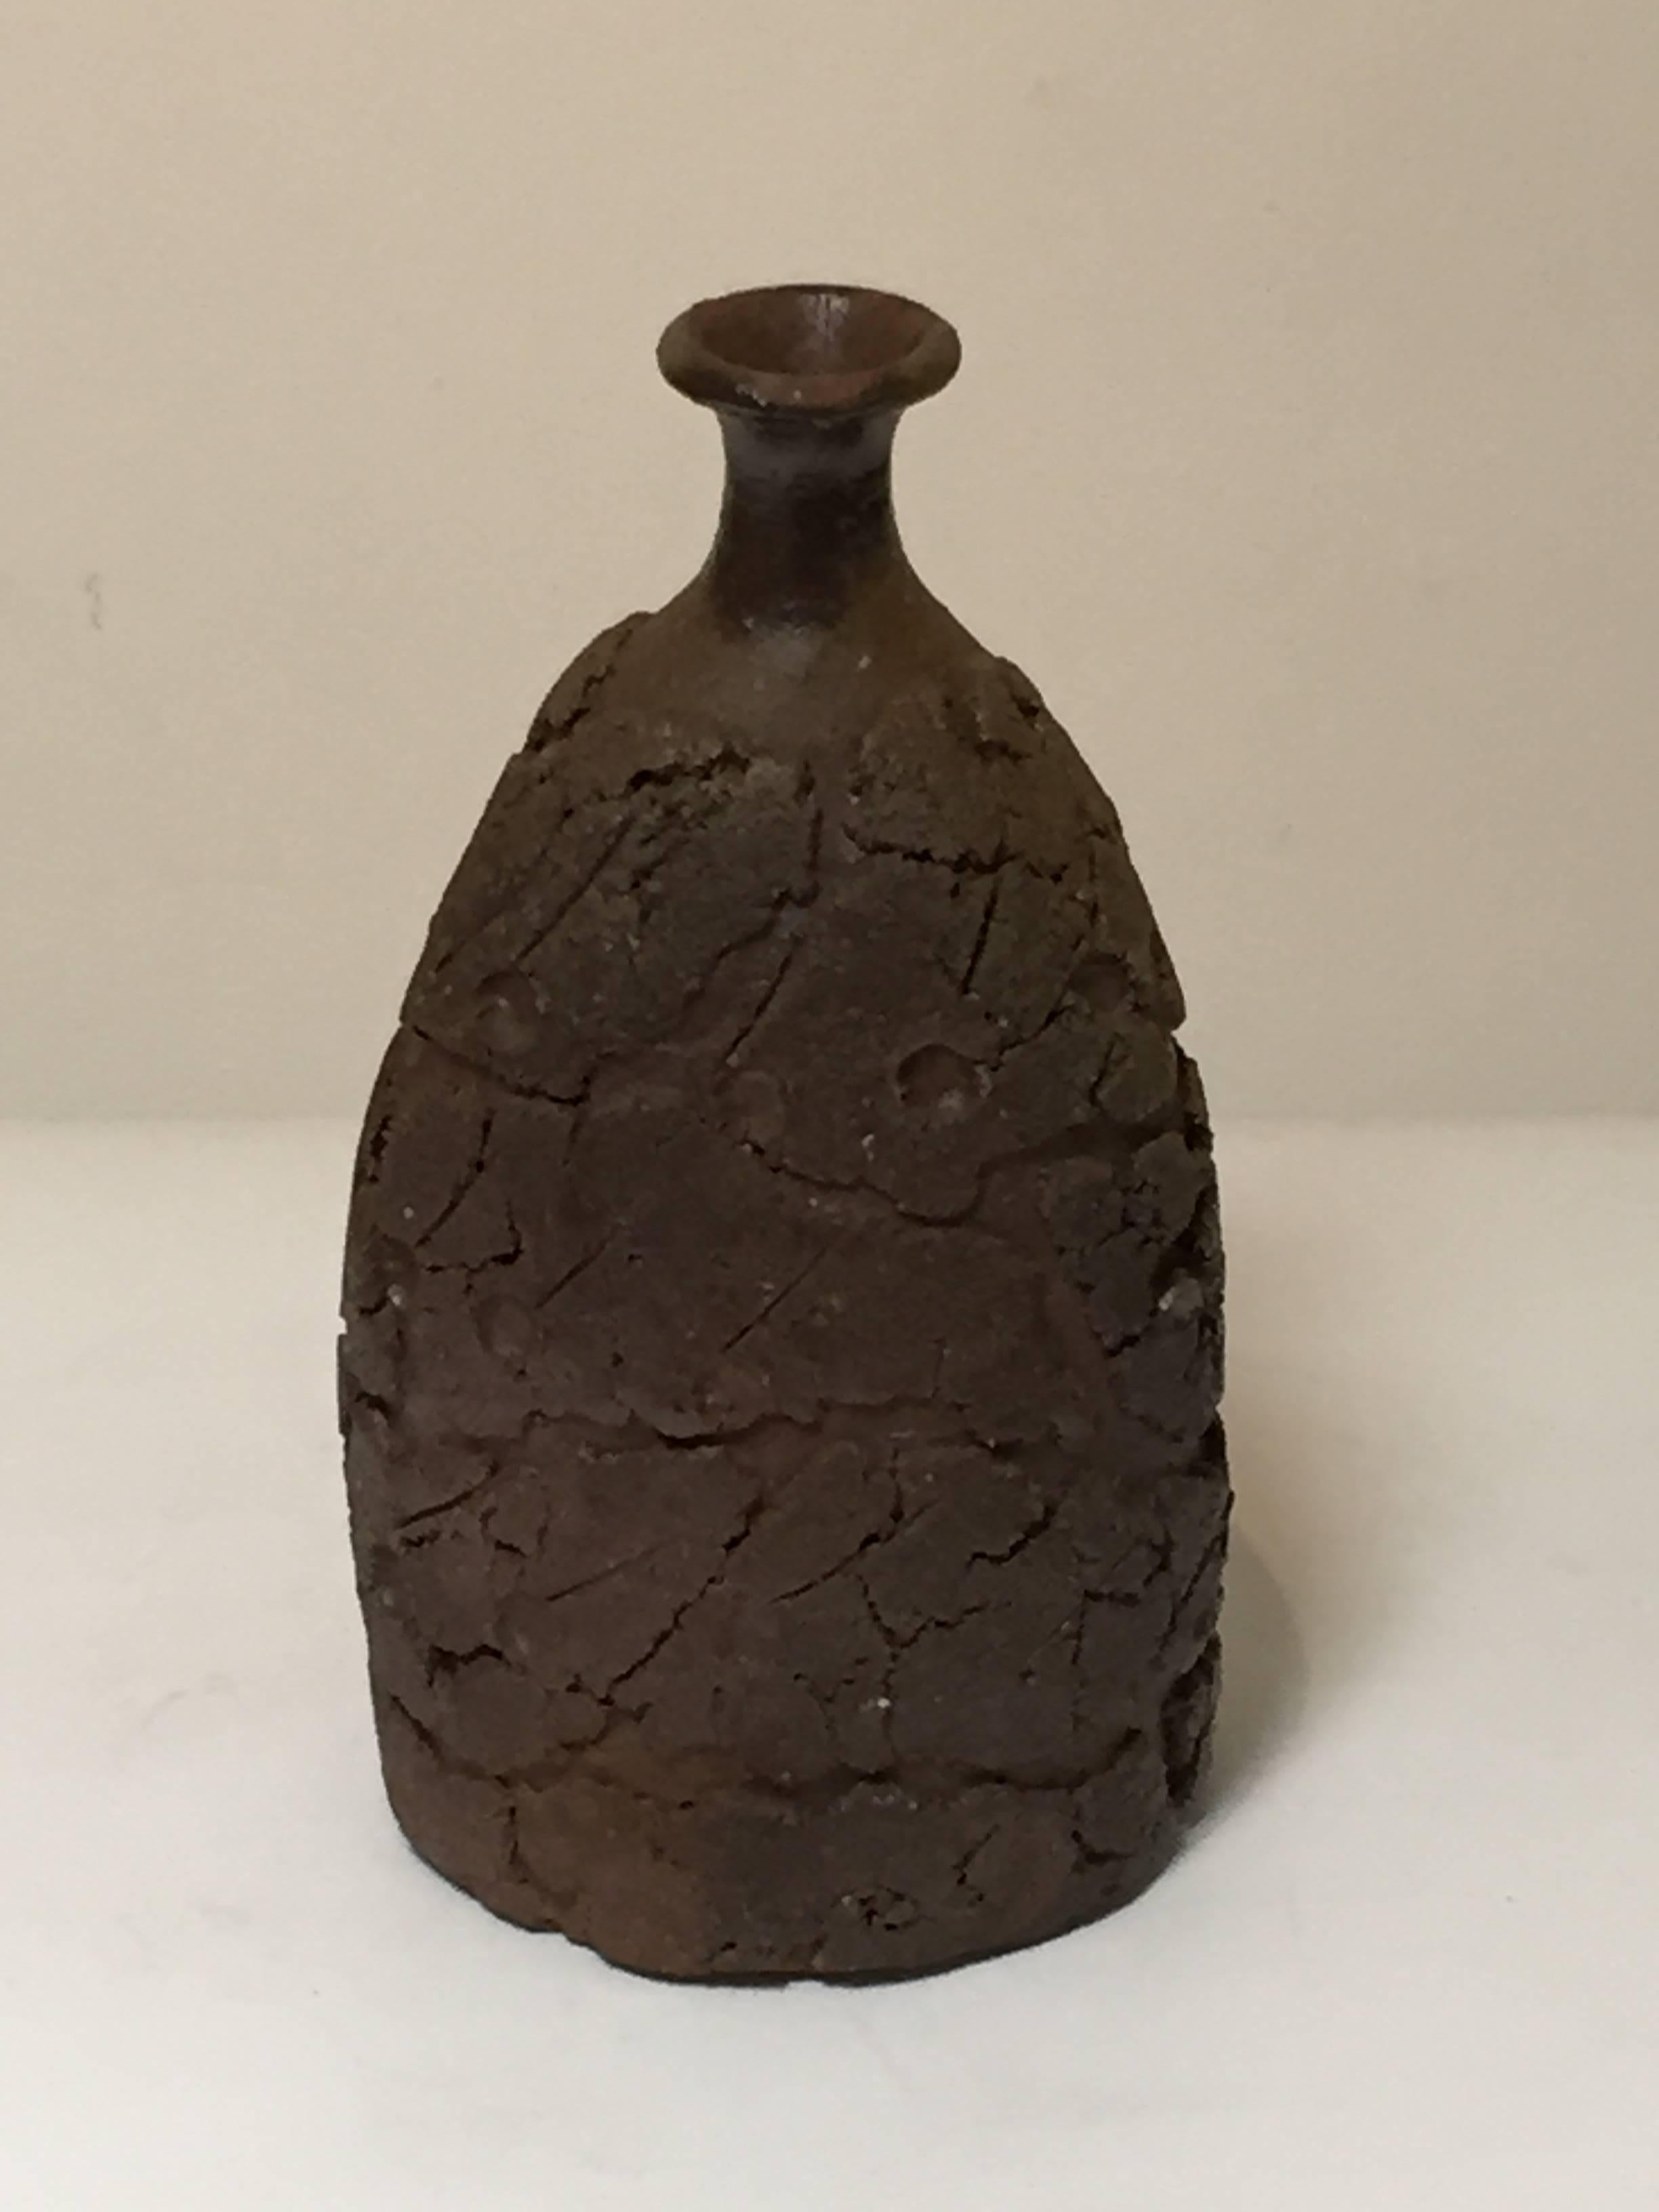 Offered by J R Richards
A textured bottle shaped vase by internationally known ceramic artist Harada Shuroku (b. 1941- ).
A course and rough clay body, fired in the ancient tradition using an anagama kiln.
Includes custom made and signed box.